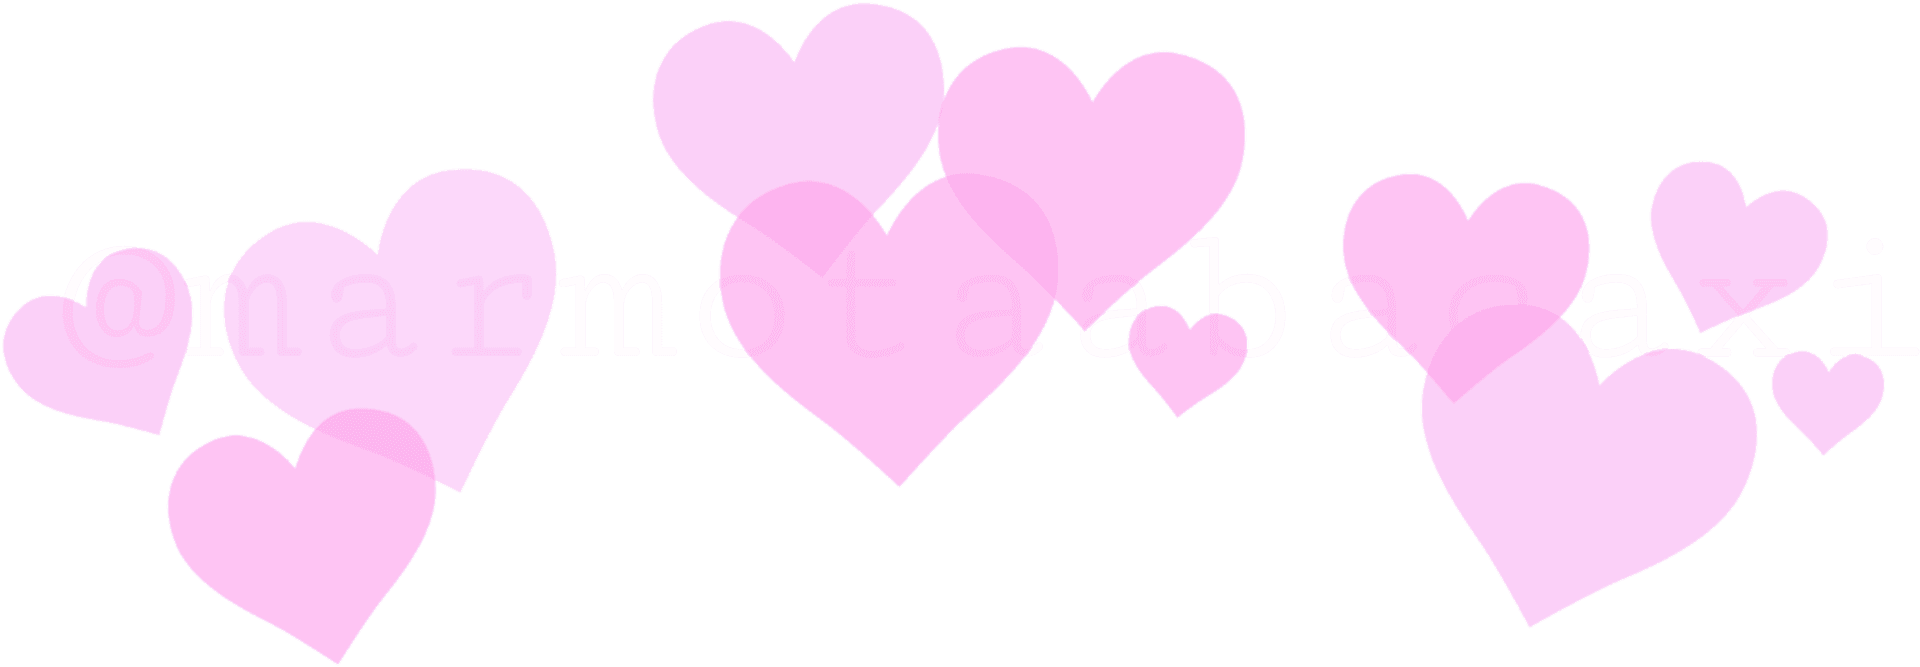 Pink Heart Overlay Graphic PNG